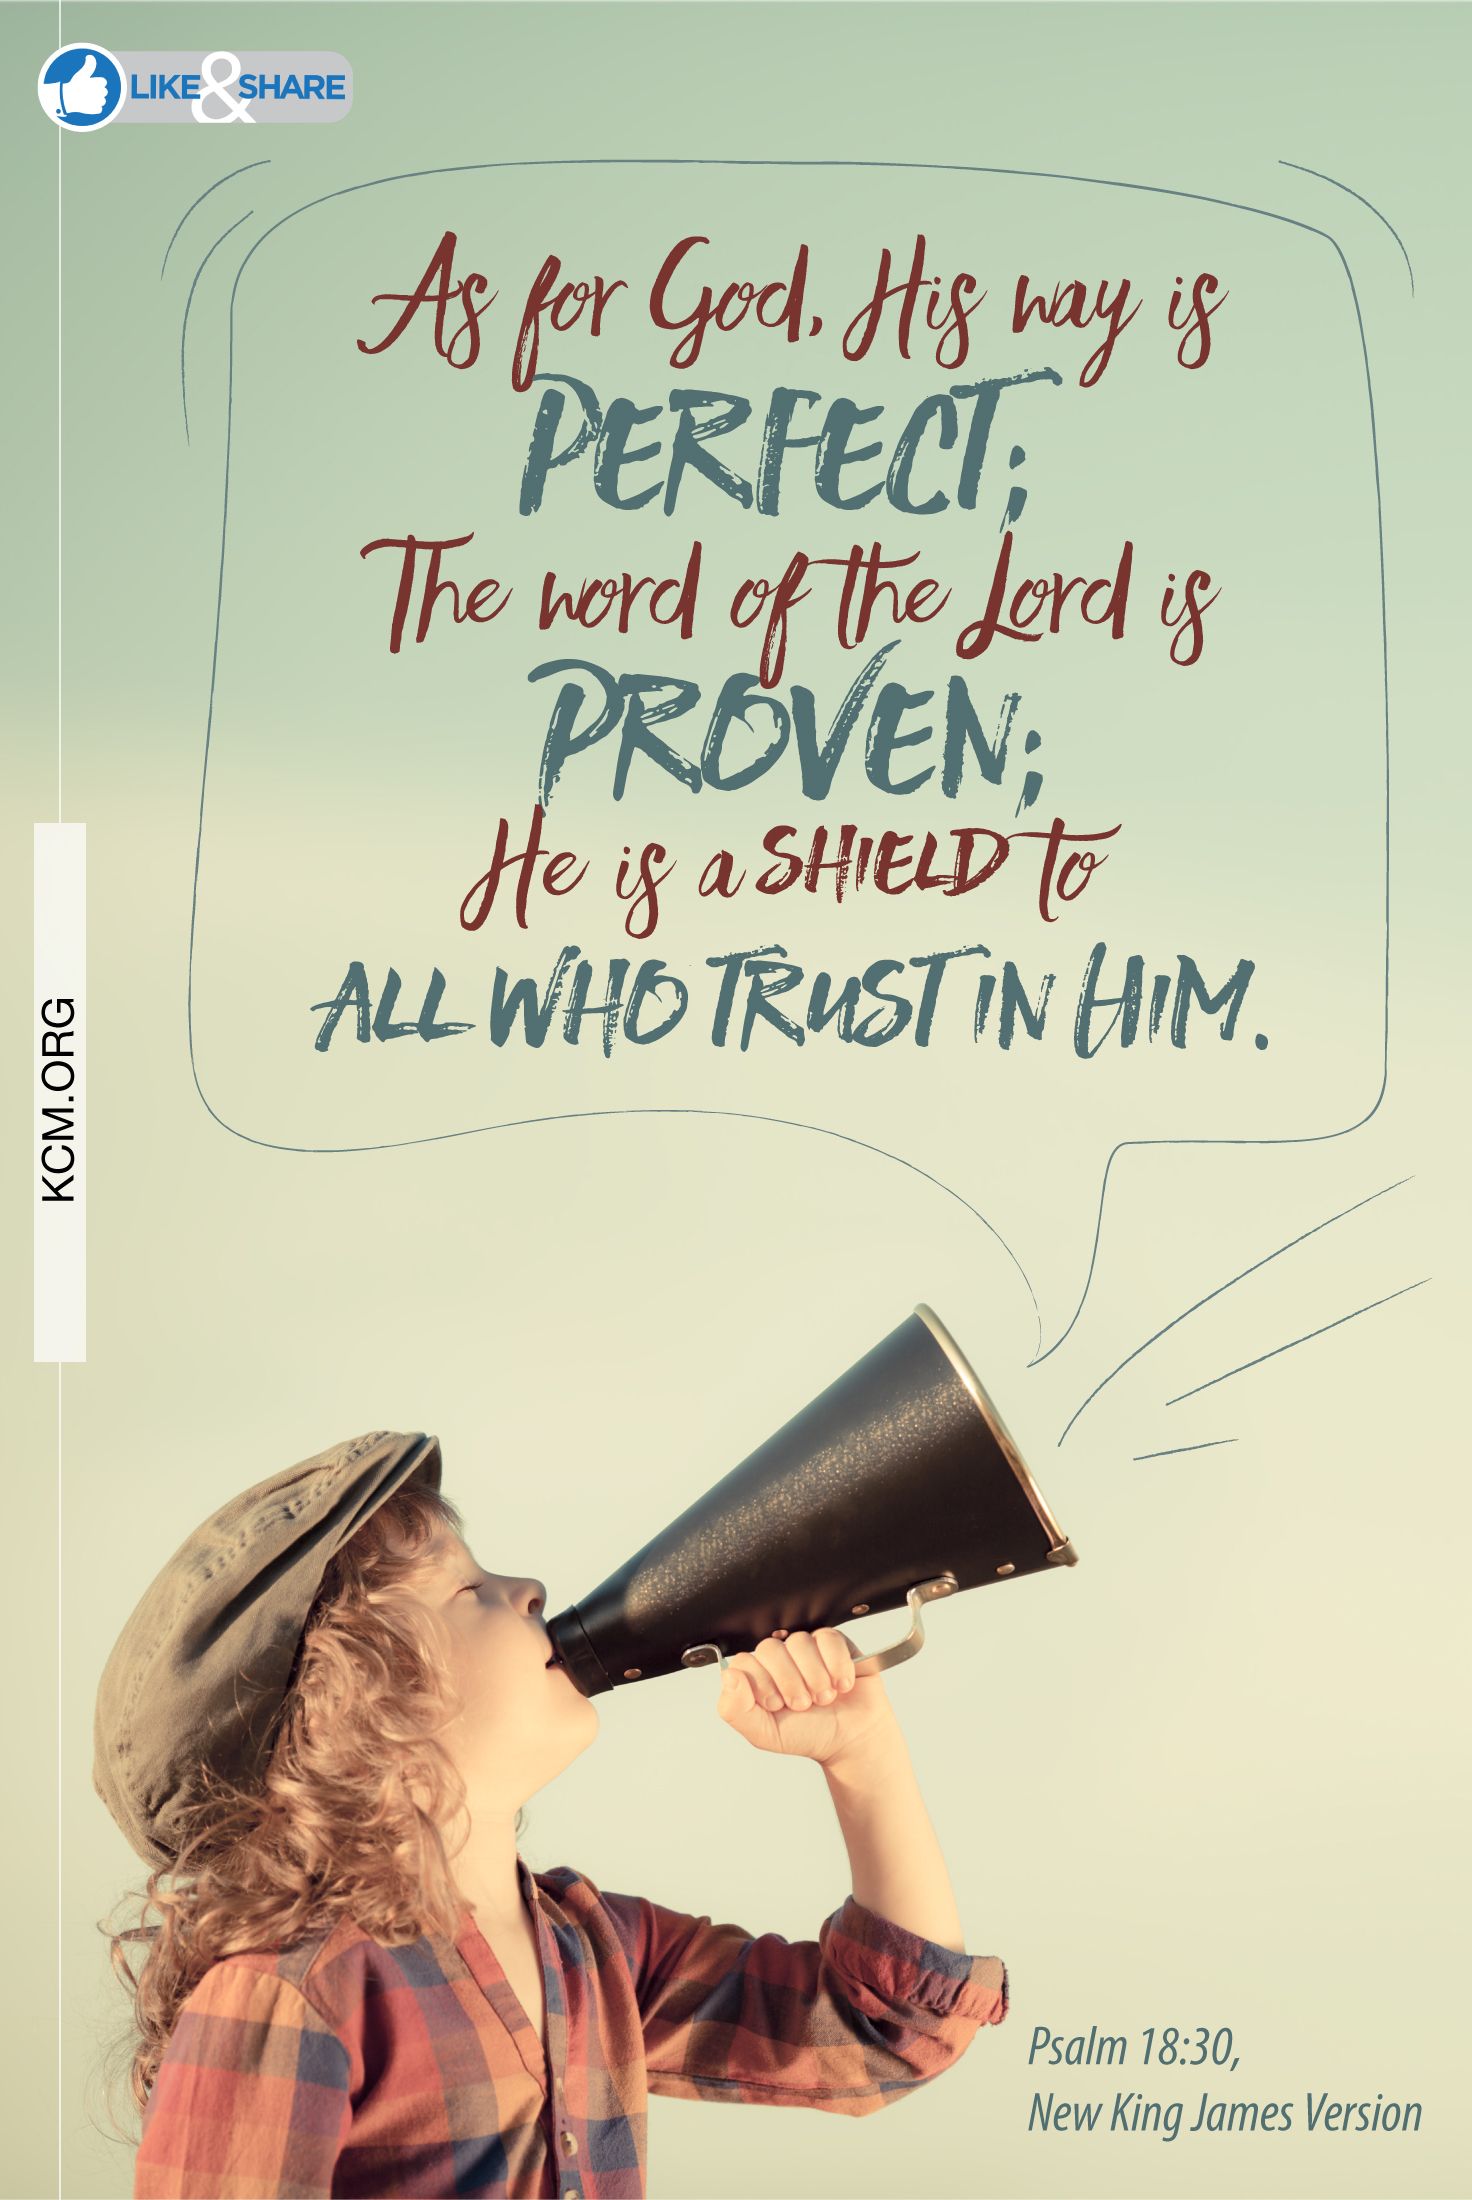 The Lord is our Protector and Provider! We can trust Him! #KCM ...